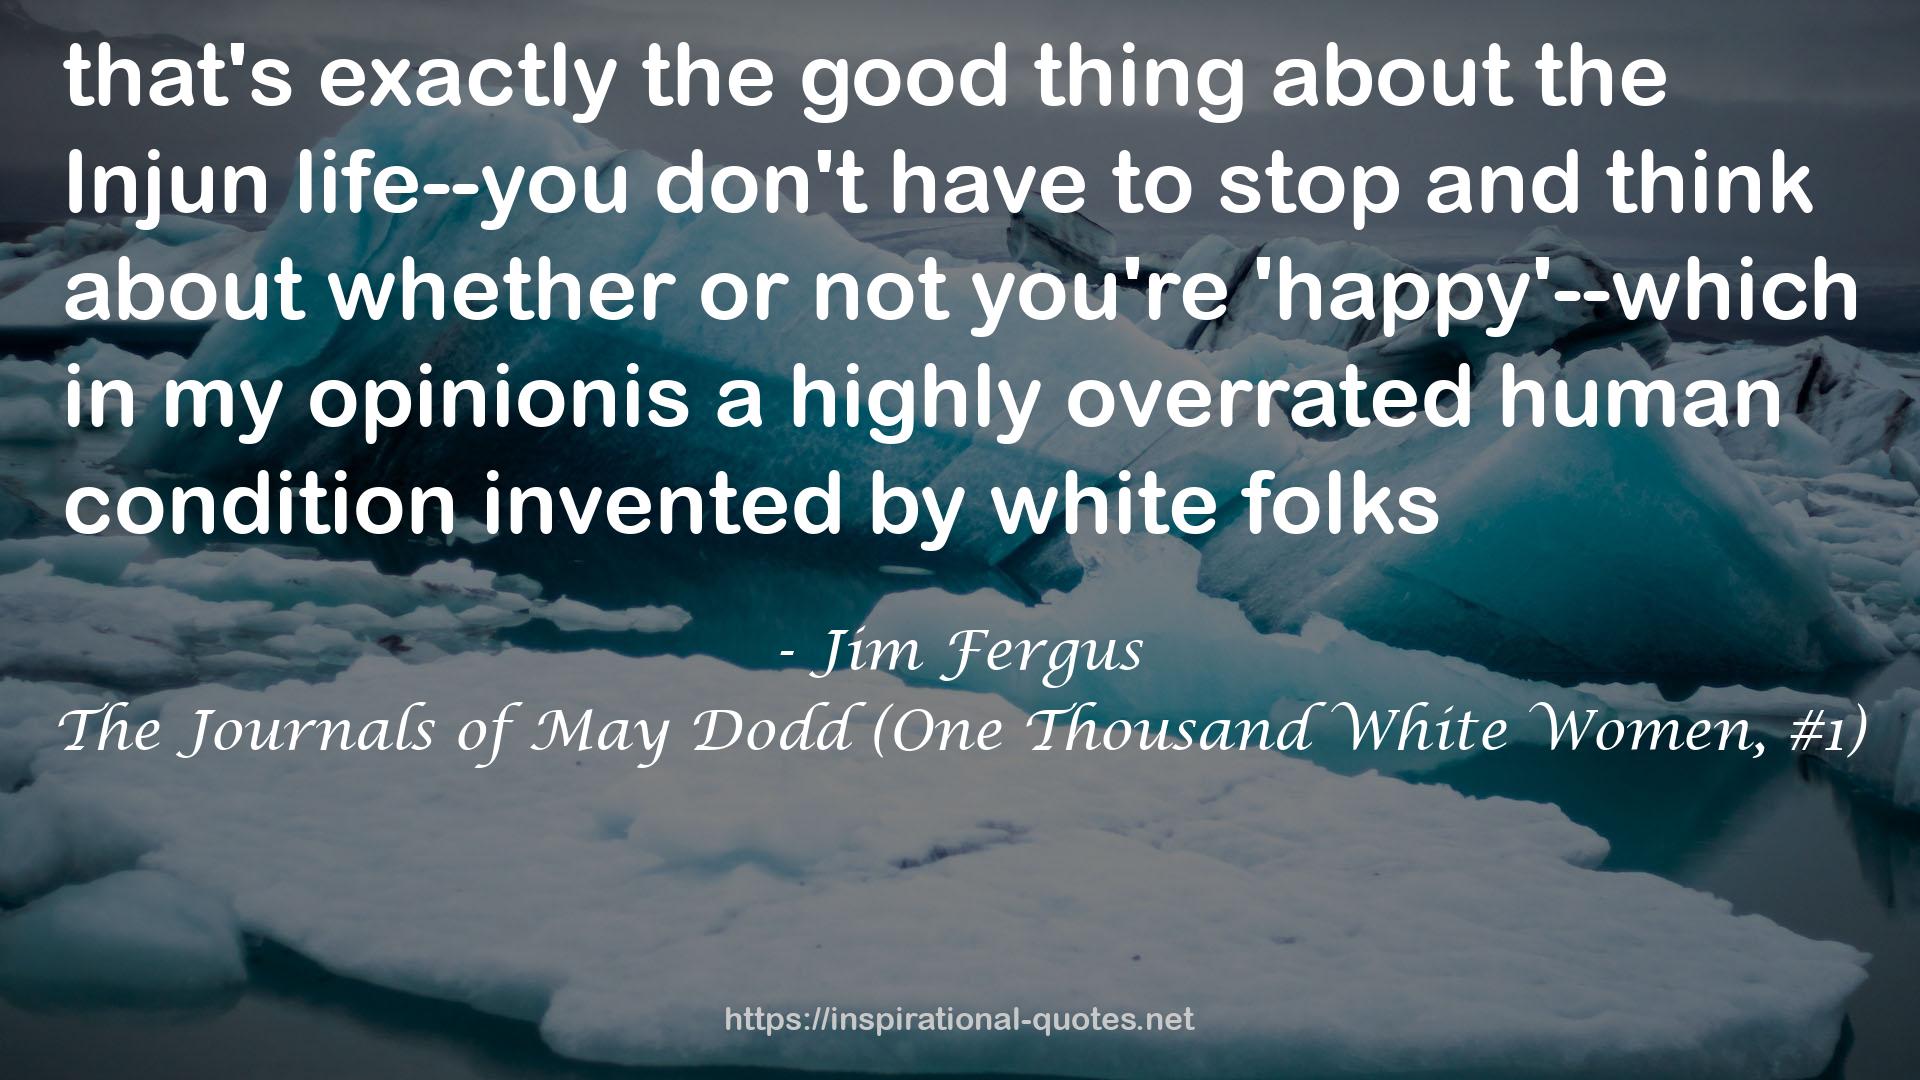 The Journals of May Dodd (One Thousand White Women, #1) QUOTES